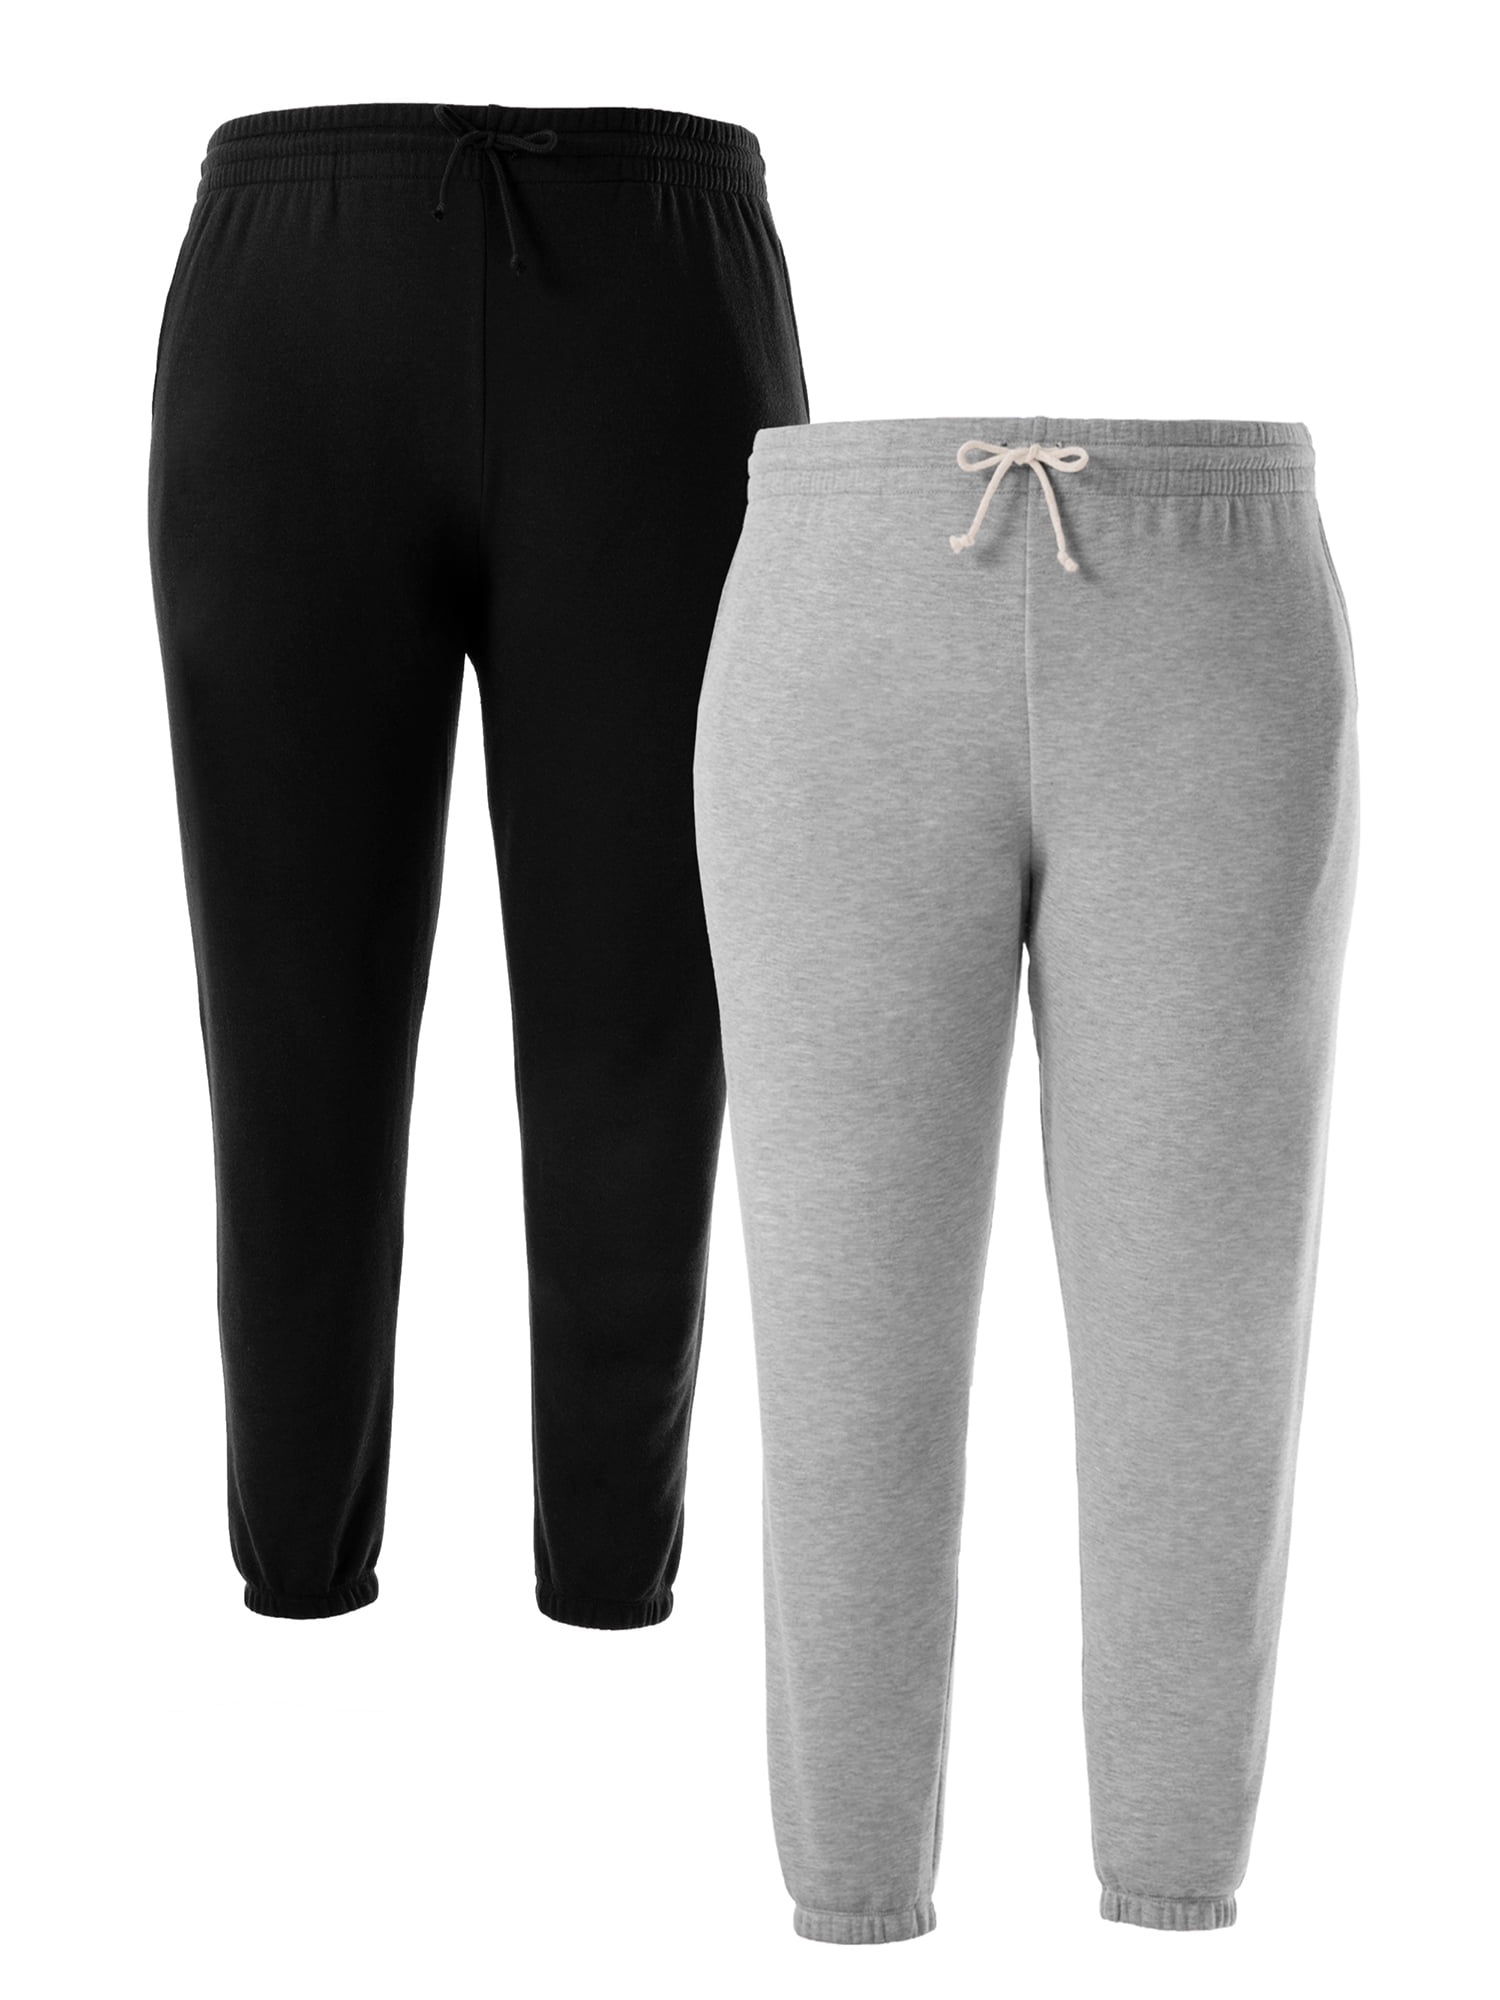 WOMEN FASHION Trousers Tracksuit and joggers Capri discount 63% Black M Ilico tracksuit and joggers 